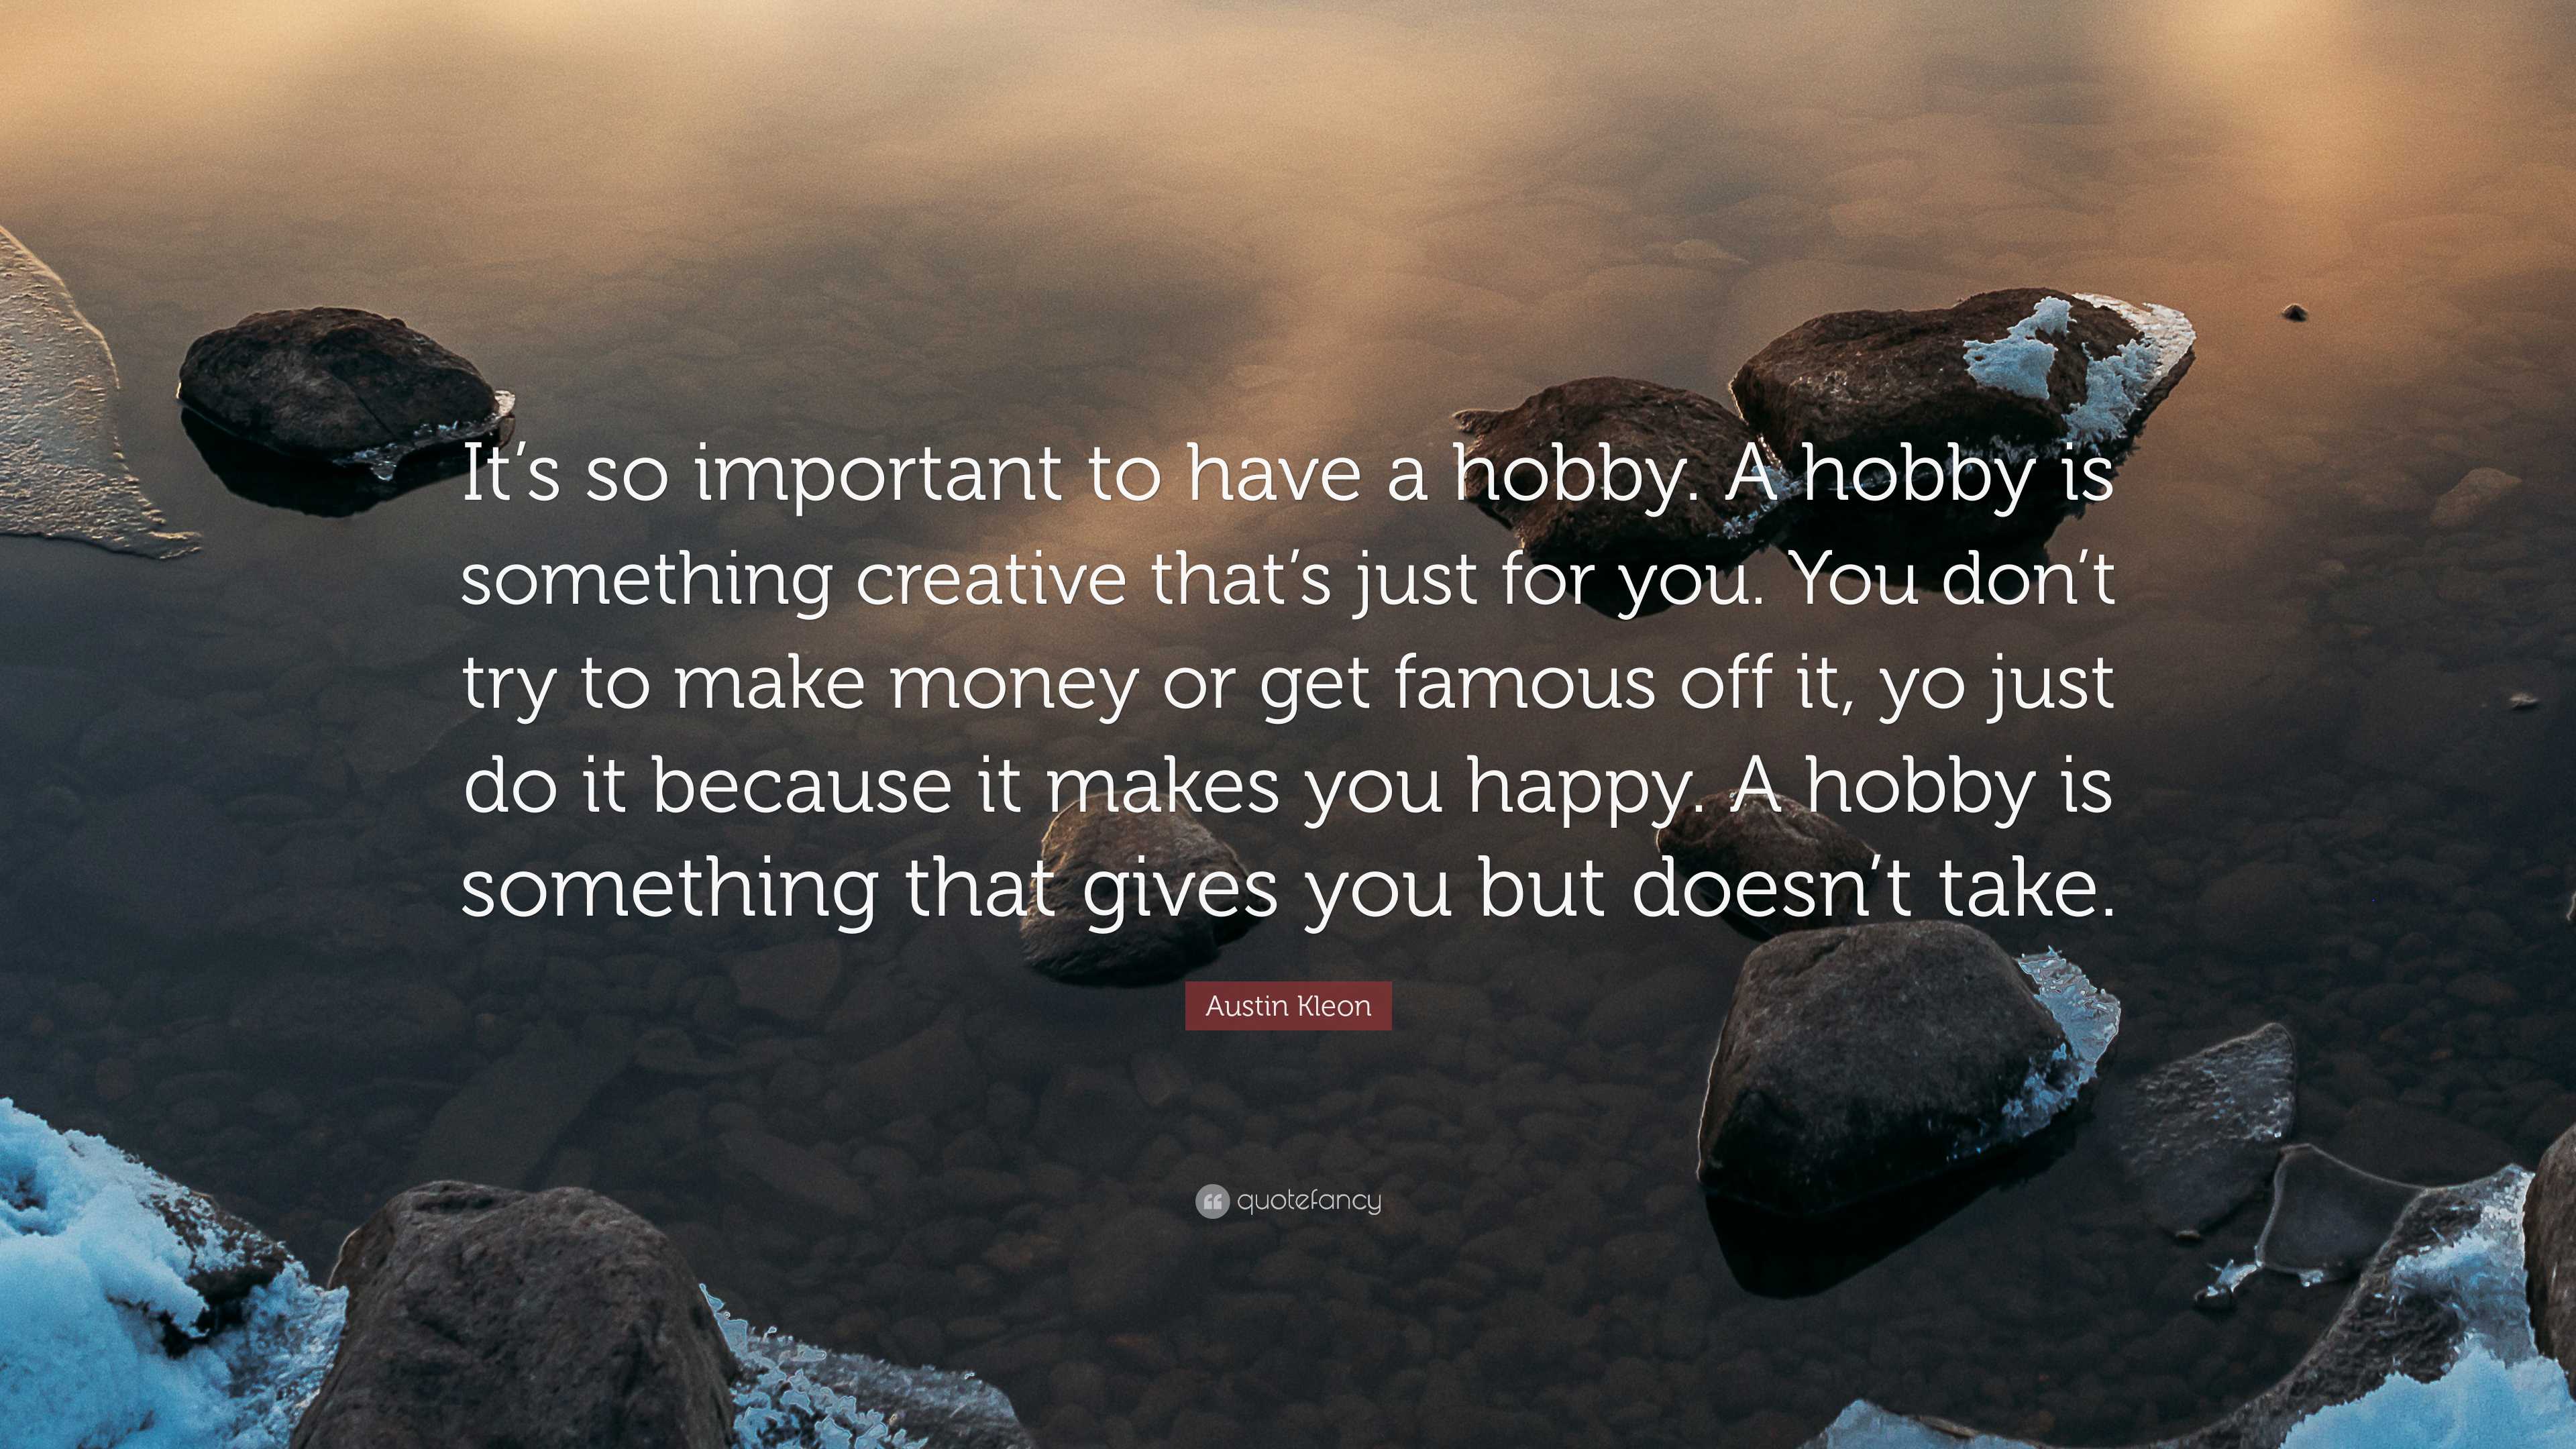 8039757 Austin Kleon Quote It S So Important To Have A Hobby A Hobby Is 